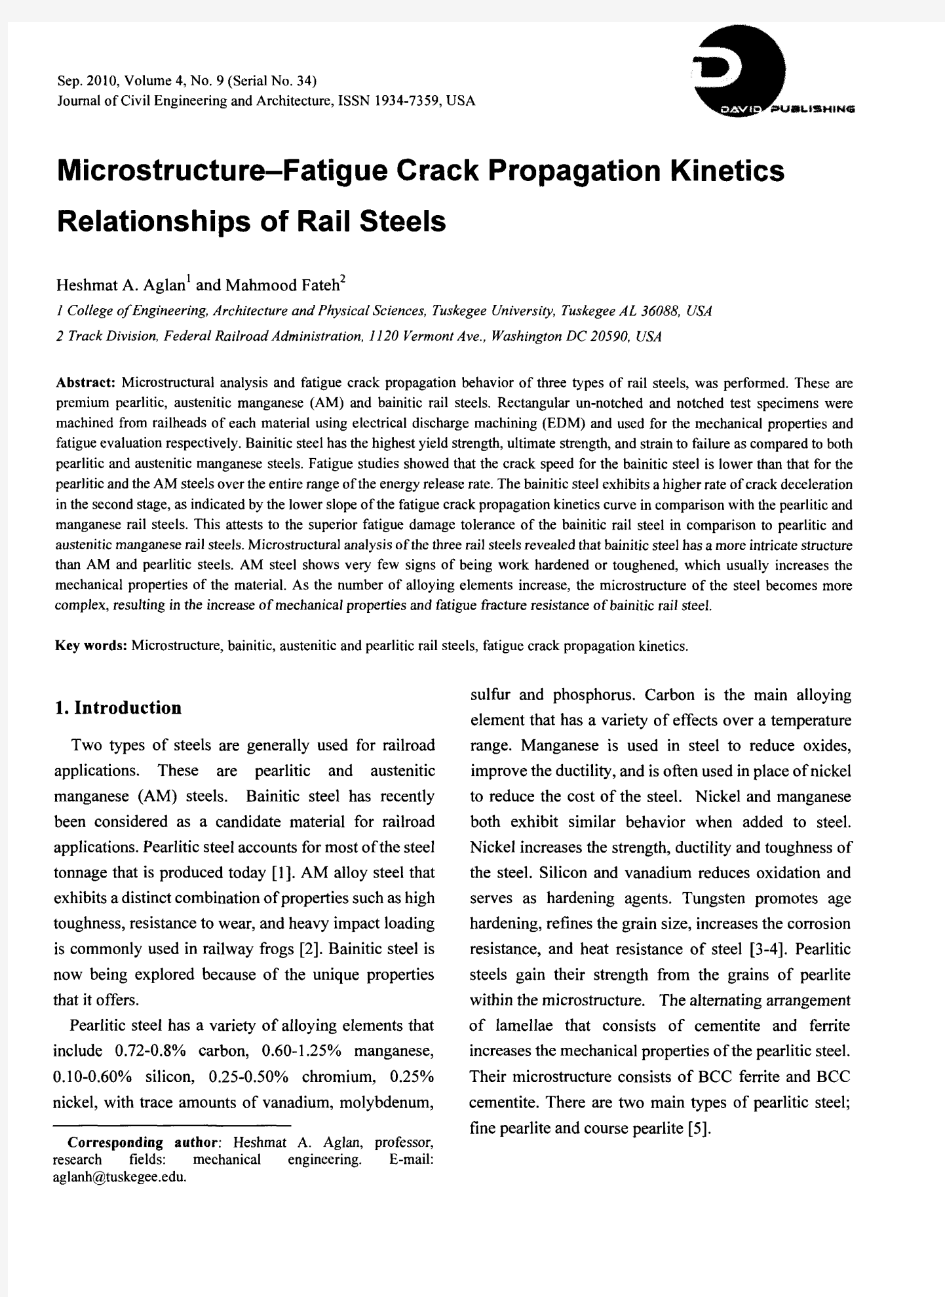 Microstructure-Fatigue Crack Propagation Kinetics Relationships of Rail Steels